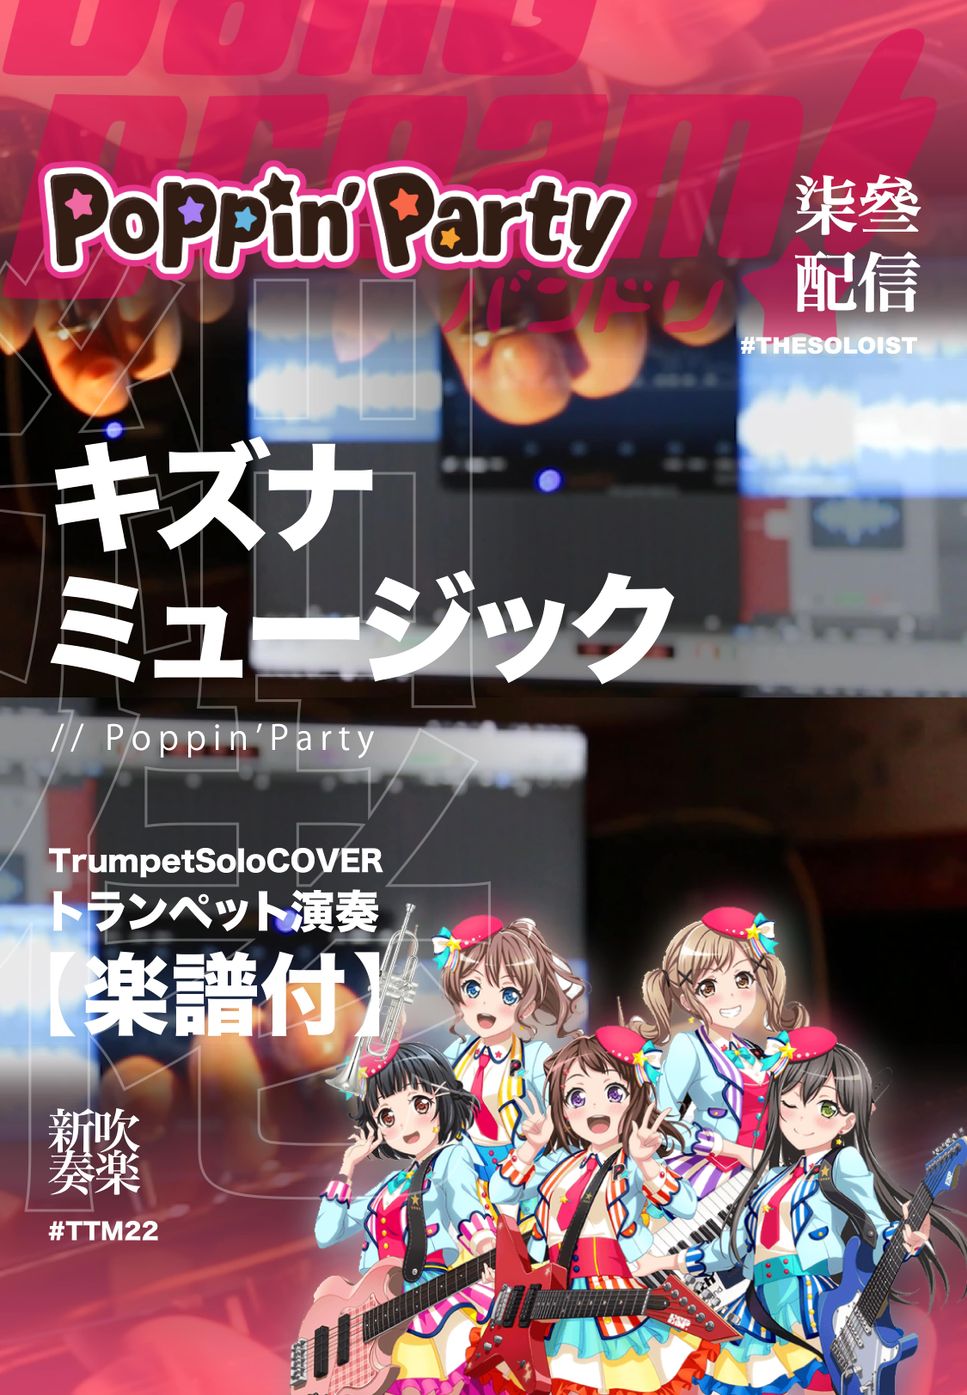 Poppin'Party - Bangdream - KizunaMusic (TrumpetSolo Cover) by LITTLEBROTHER Kel.L